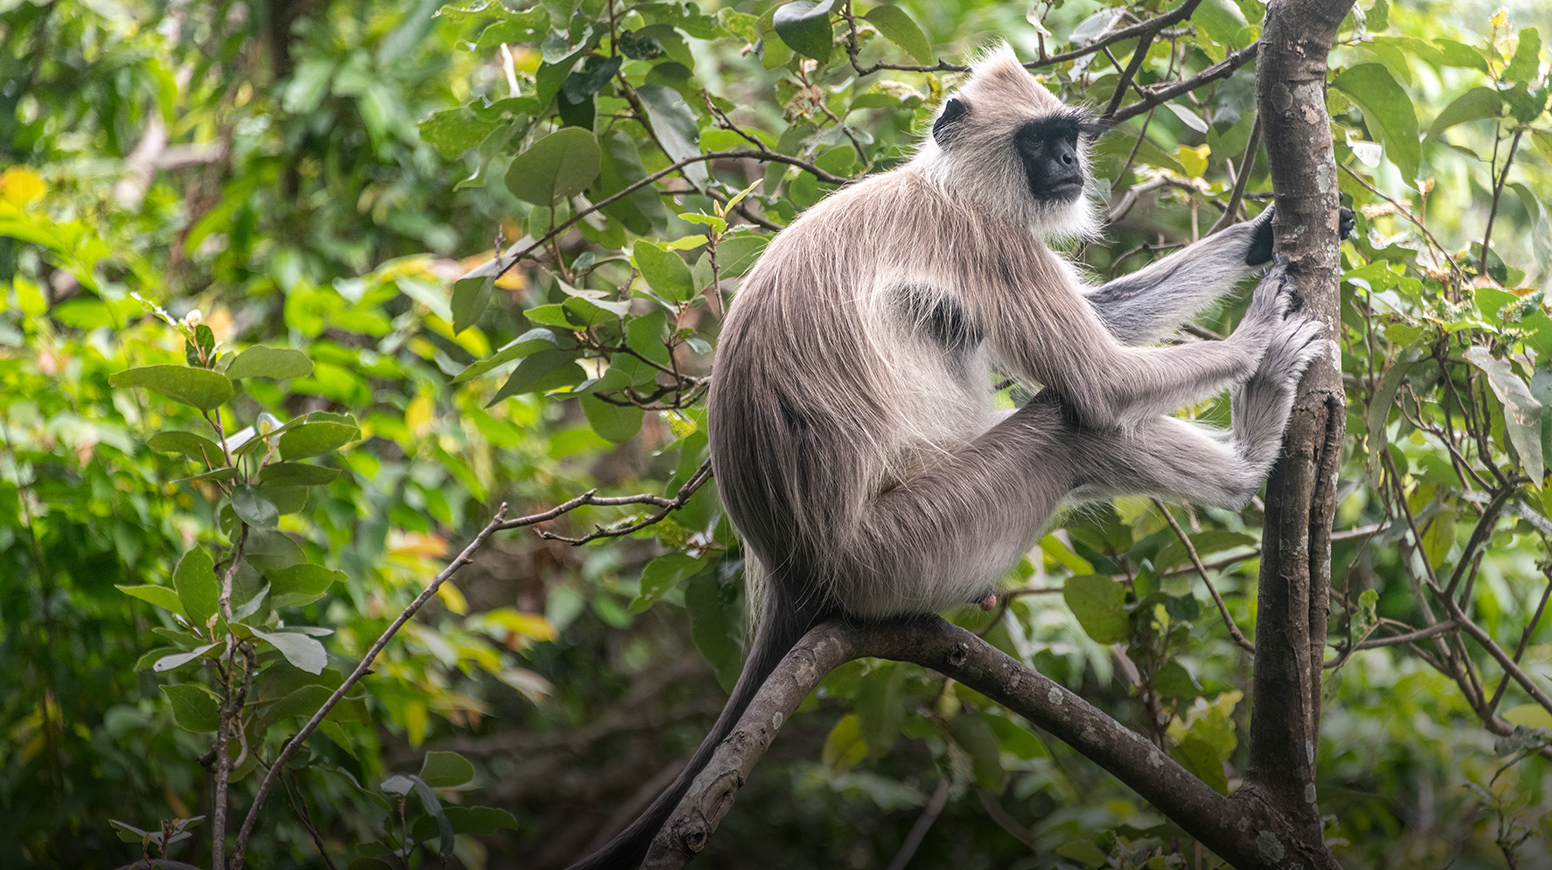 A gray langur monkey perched in a forest tree